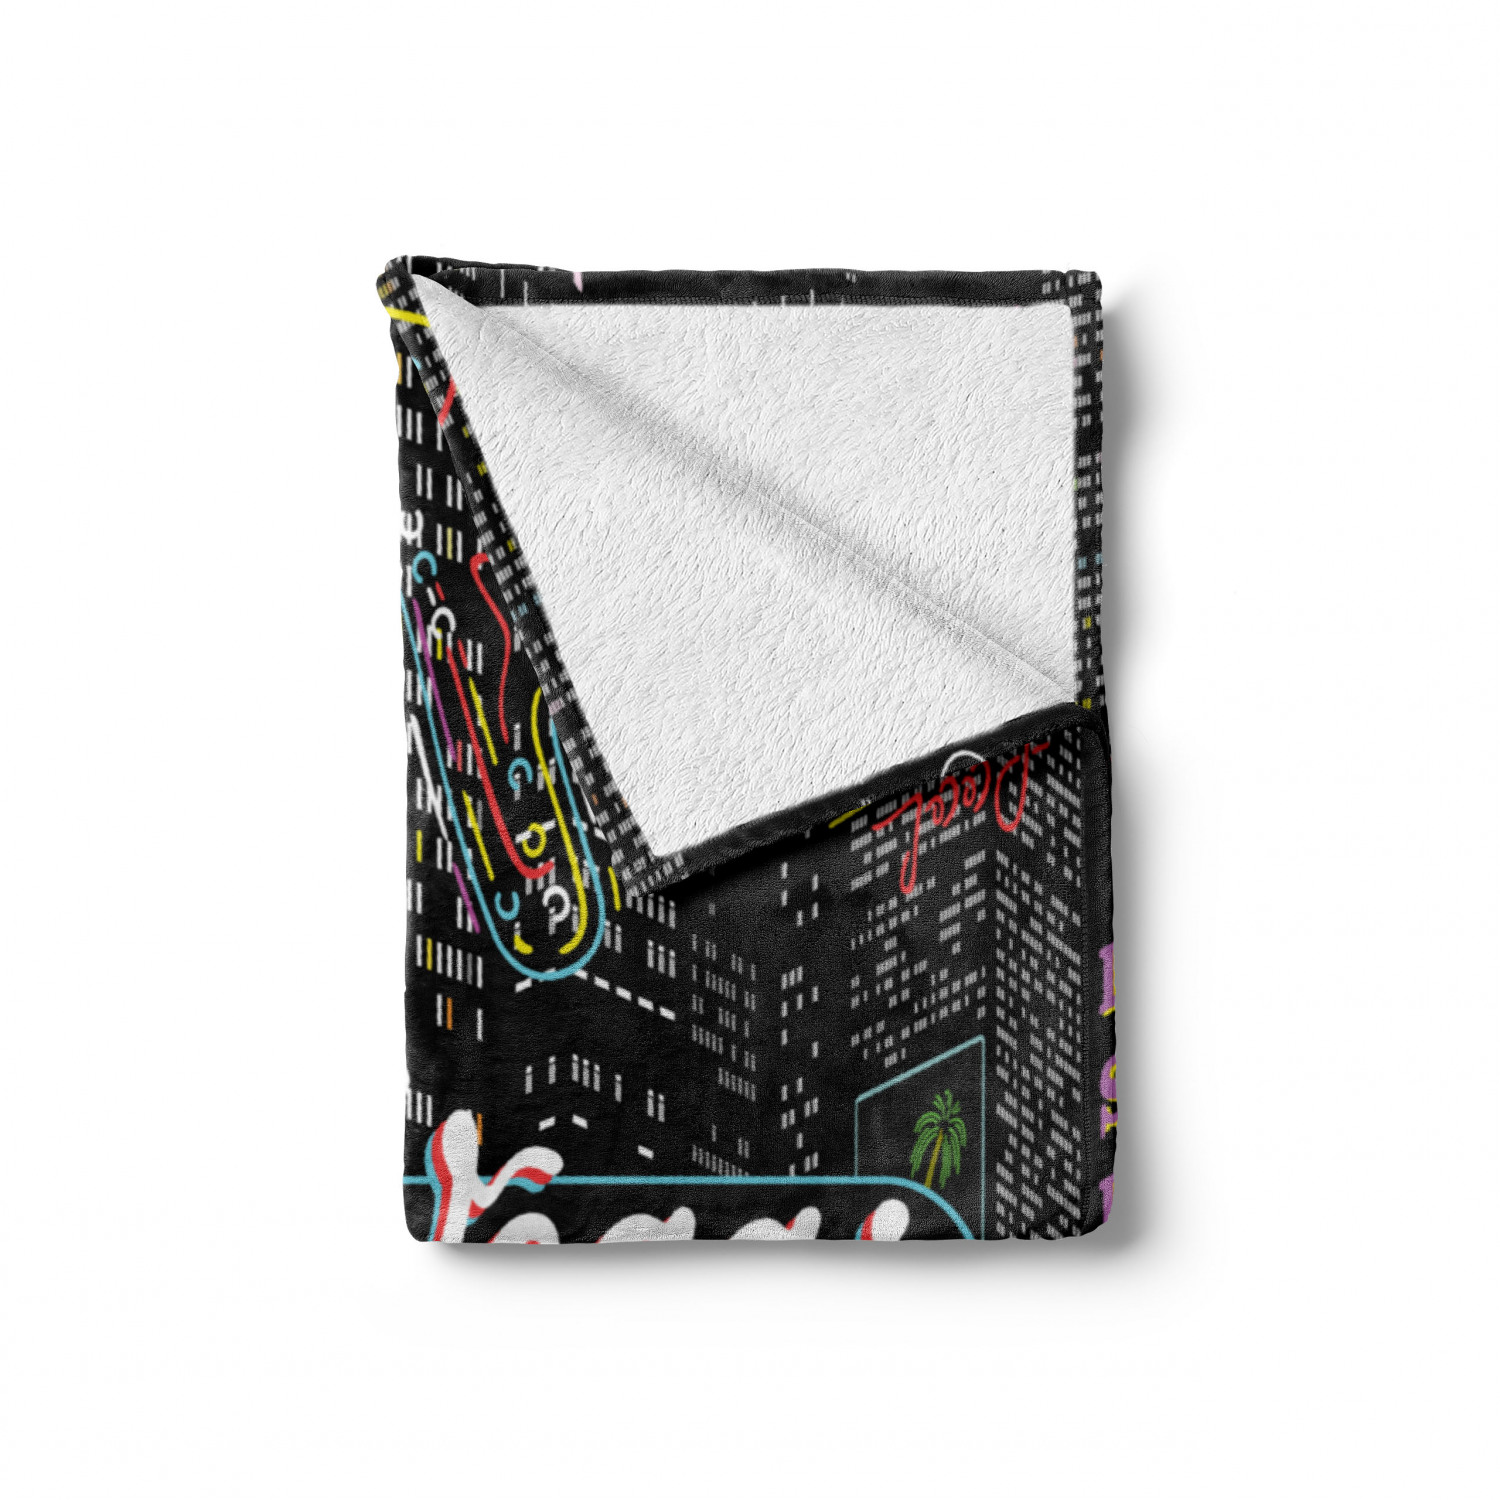 Las Vegas Soft Flannel Fleece Blanket, Colorful Elements of Vegas Entertaintment Monochrome Buildings Sax and Bar Signs, Cozy Plush for Indoor and Outdoor Use, 50" x 70", Multicolor, by Ambesonne - image 2 of 6